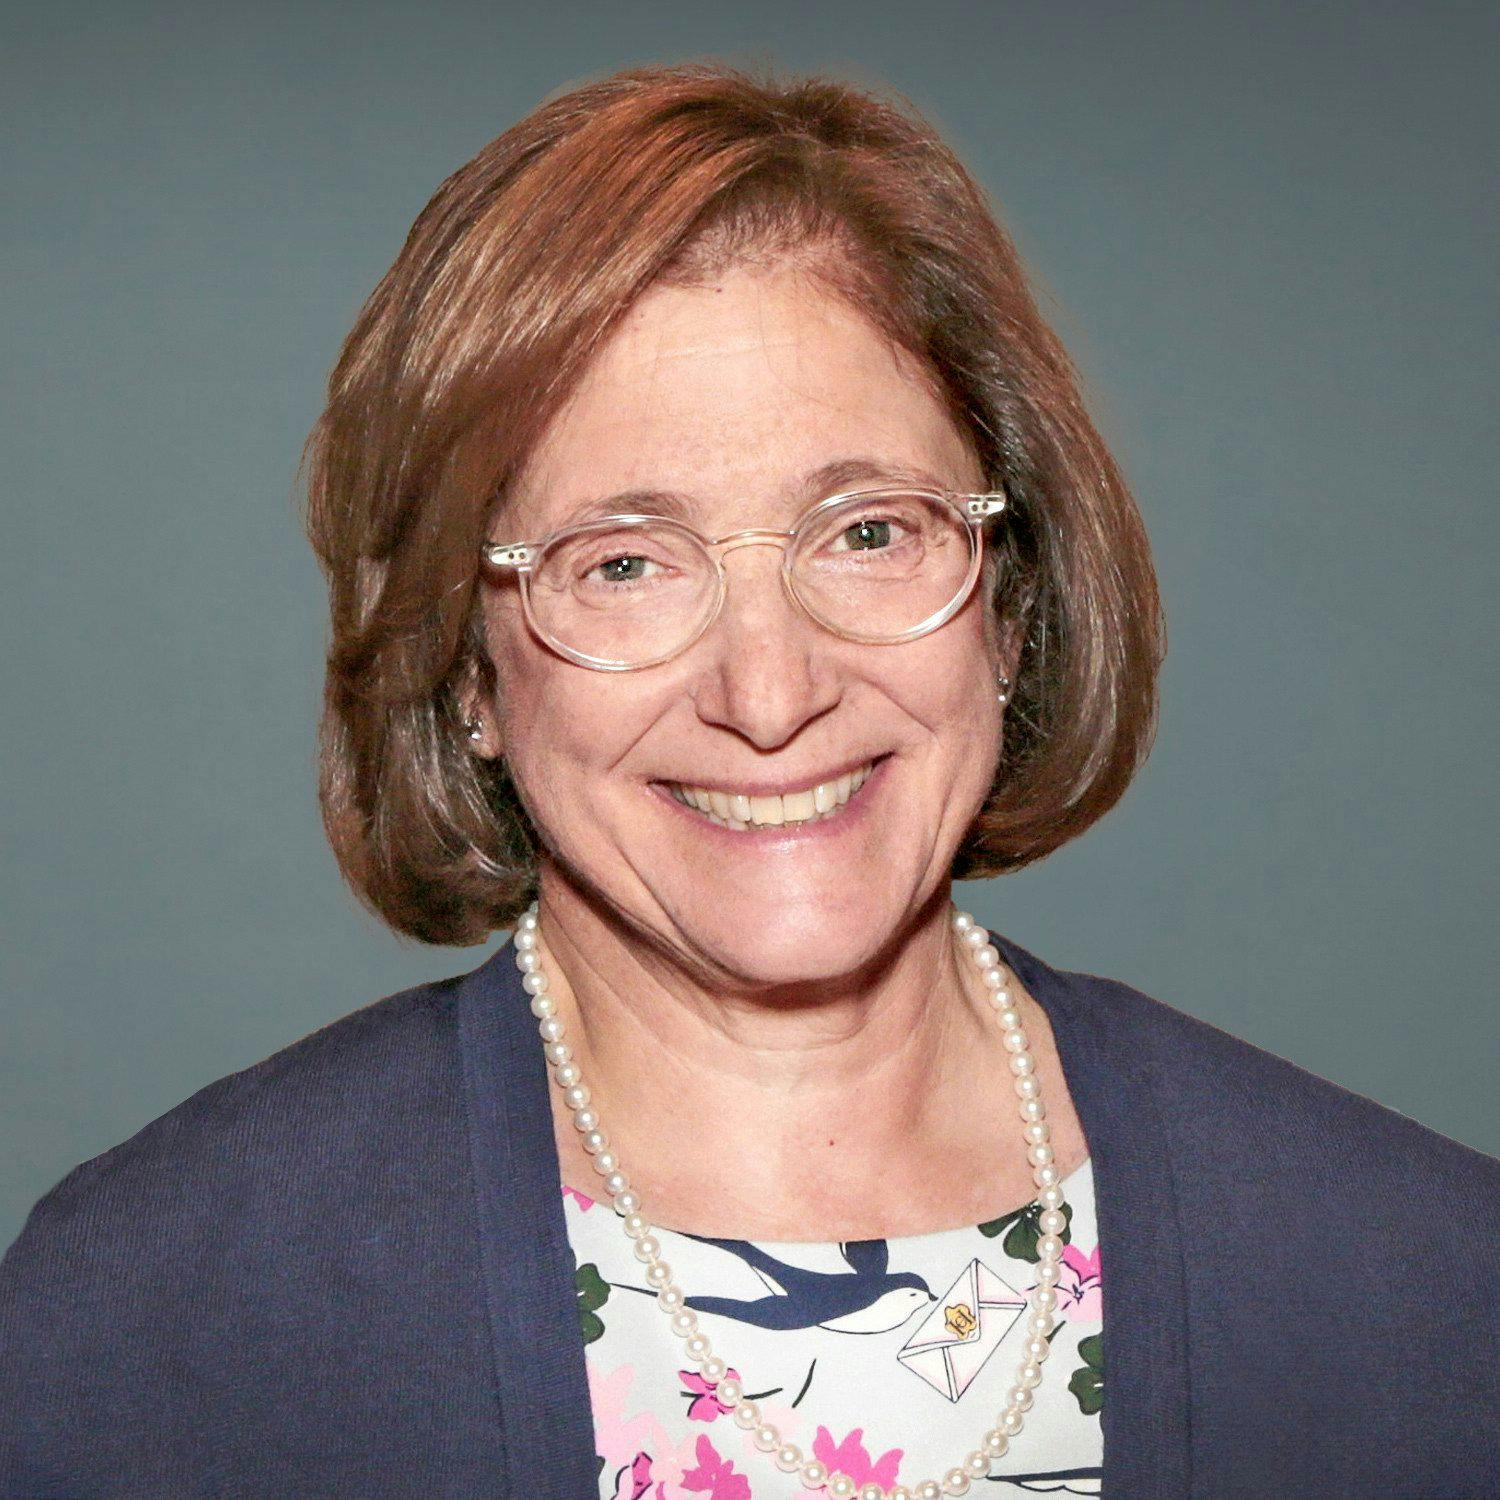 Elisabeth J. Cohen, MD, has been appointed vice chair for academic affairs in the Department of Ophthalmology at NYU Langone, enhancing the department's commitment to research and advancing its reputation for excellence in studying and treating diseases of the eye.